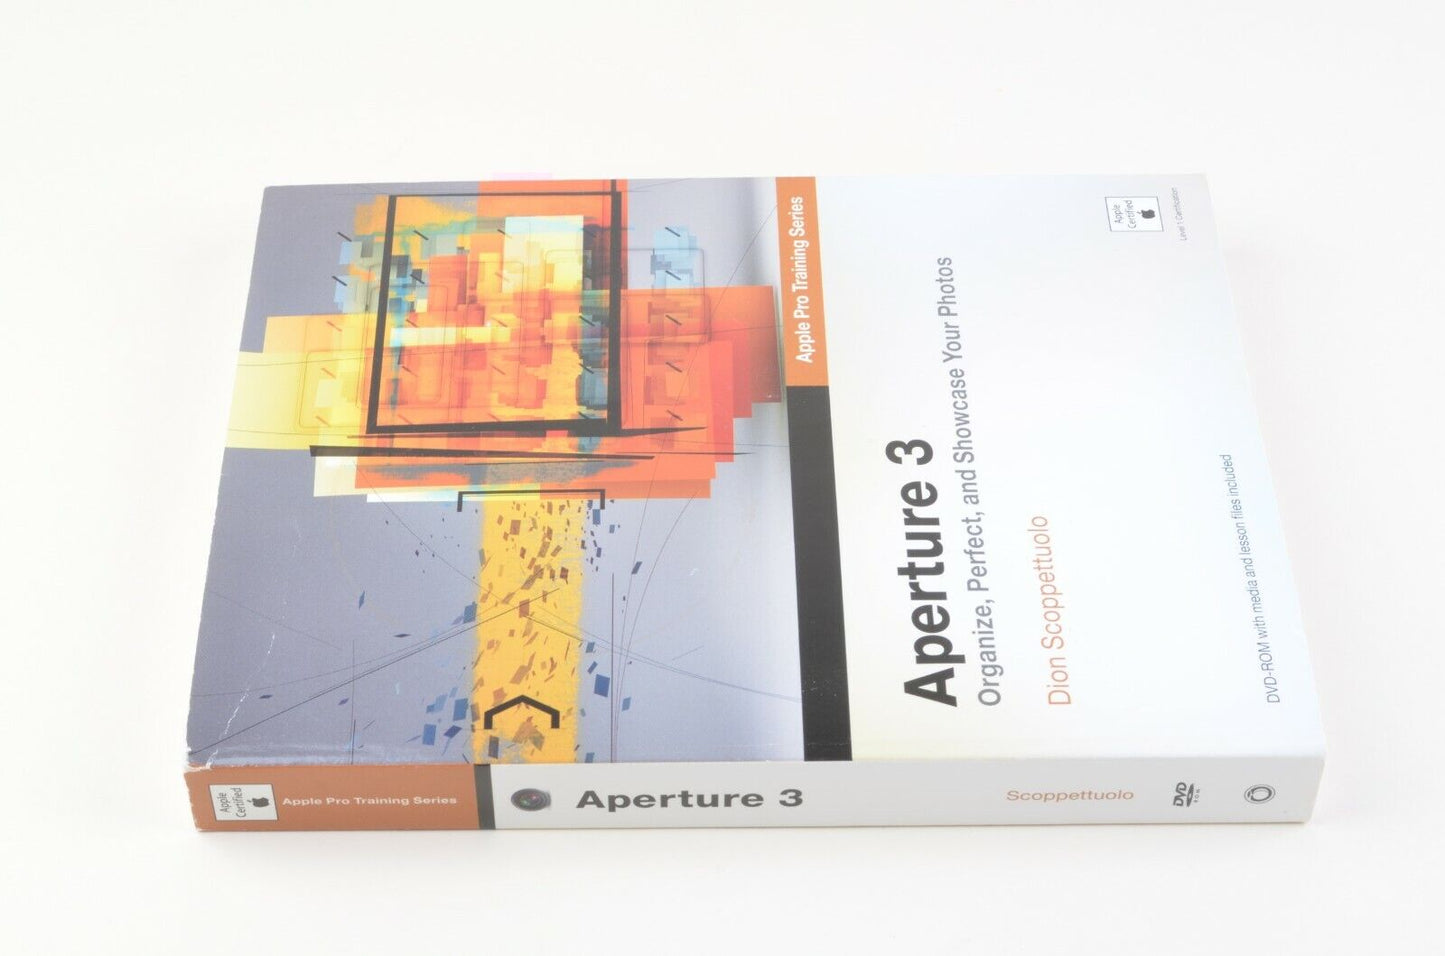 APPLE PRO TRAINING SERIES APERTURE 3 BOOK WITH DVD, CLEAN, COMPLETE